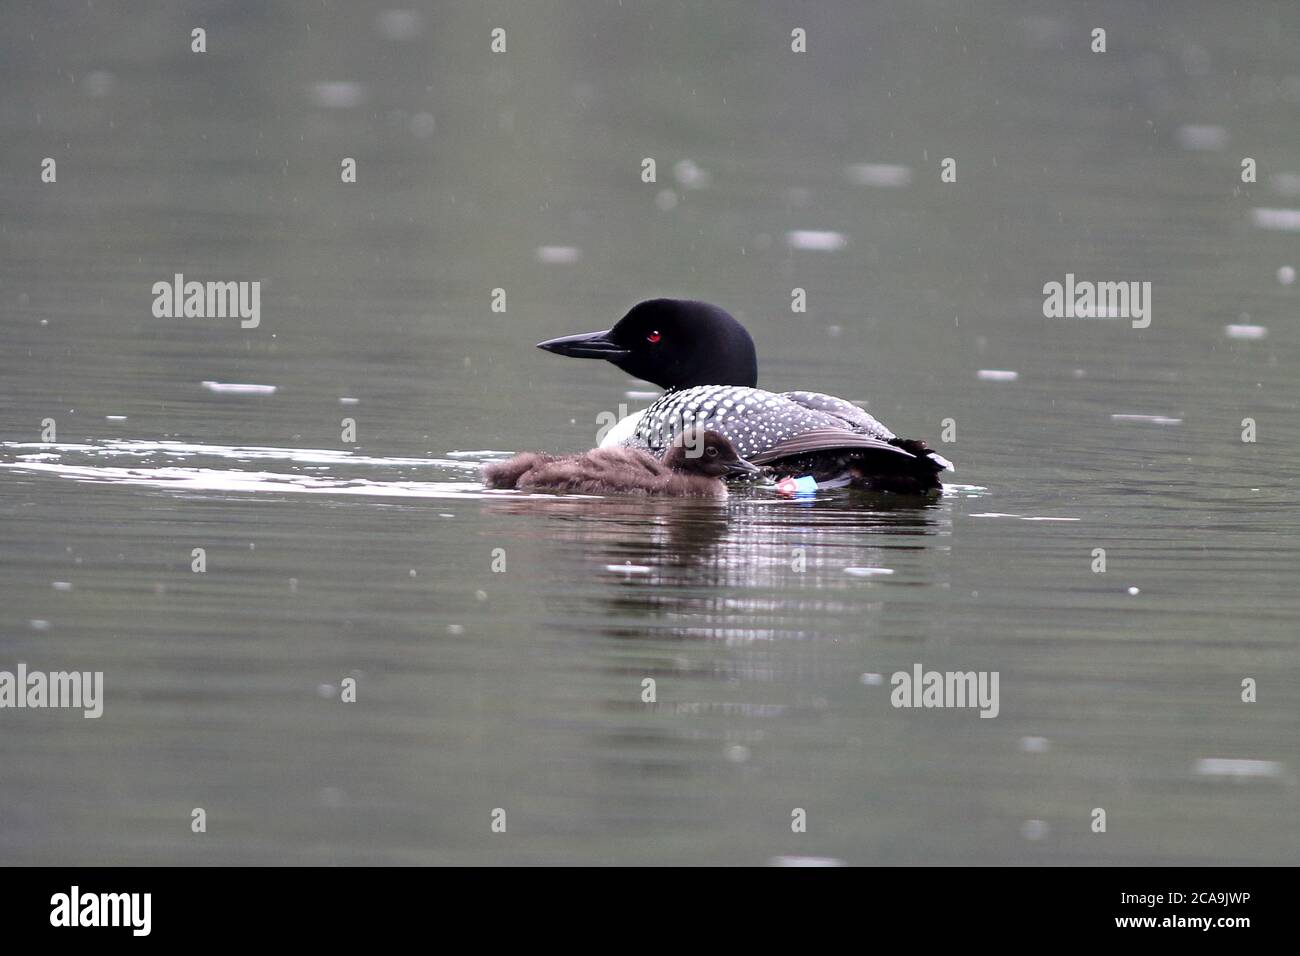 A Common Loon floats on the lake with a chick by her side Stock Photo